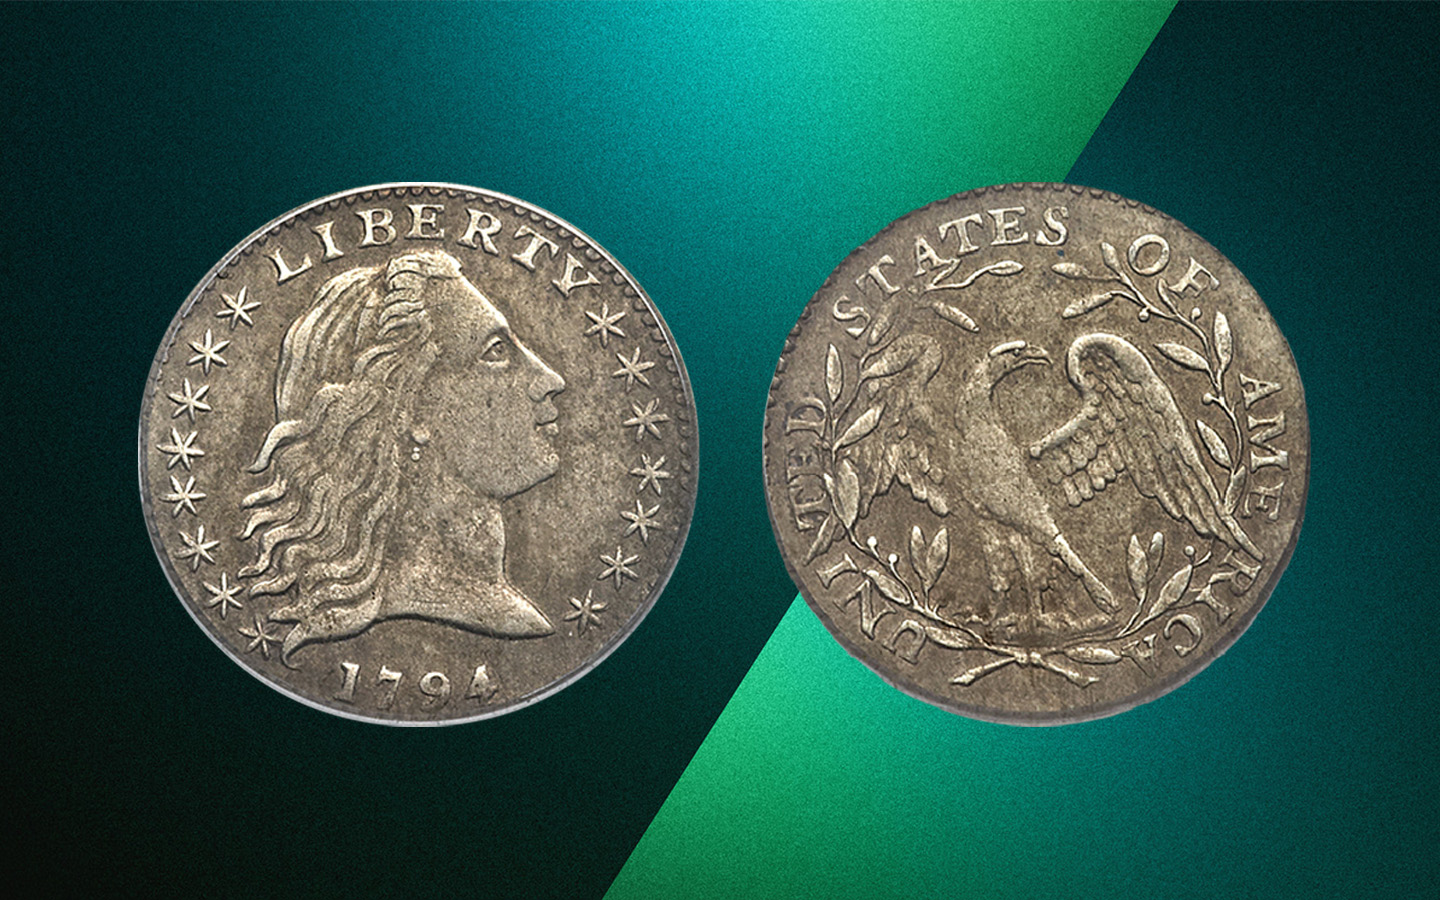 U.S. Mint Shifts Course on 1794 Dollar Tribute 